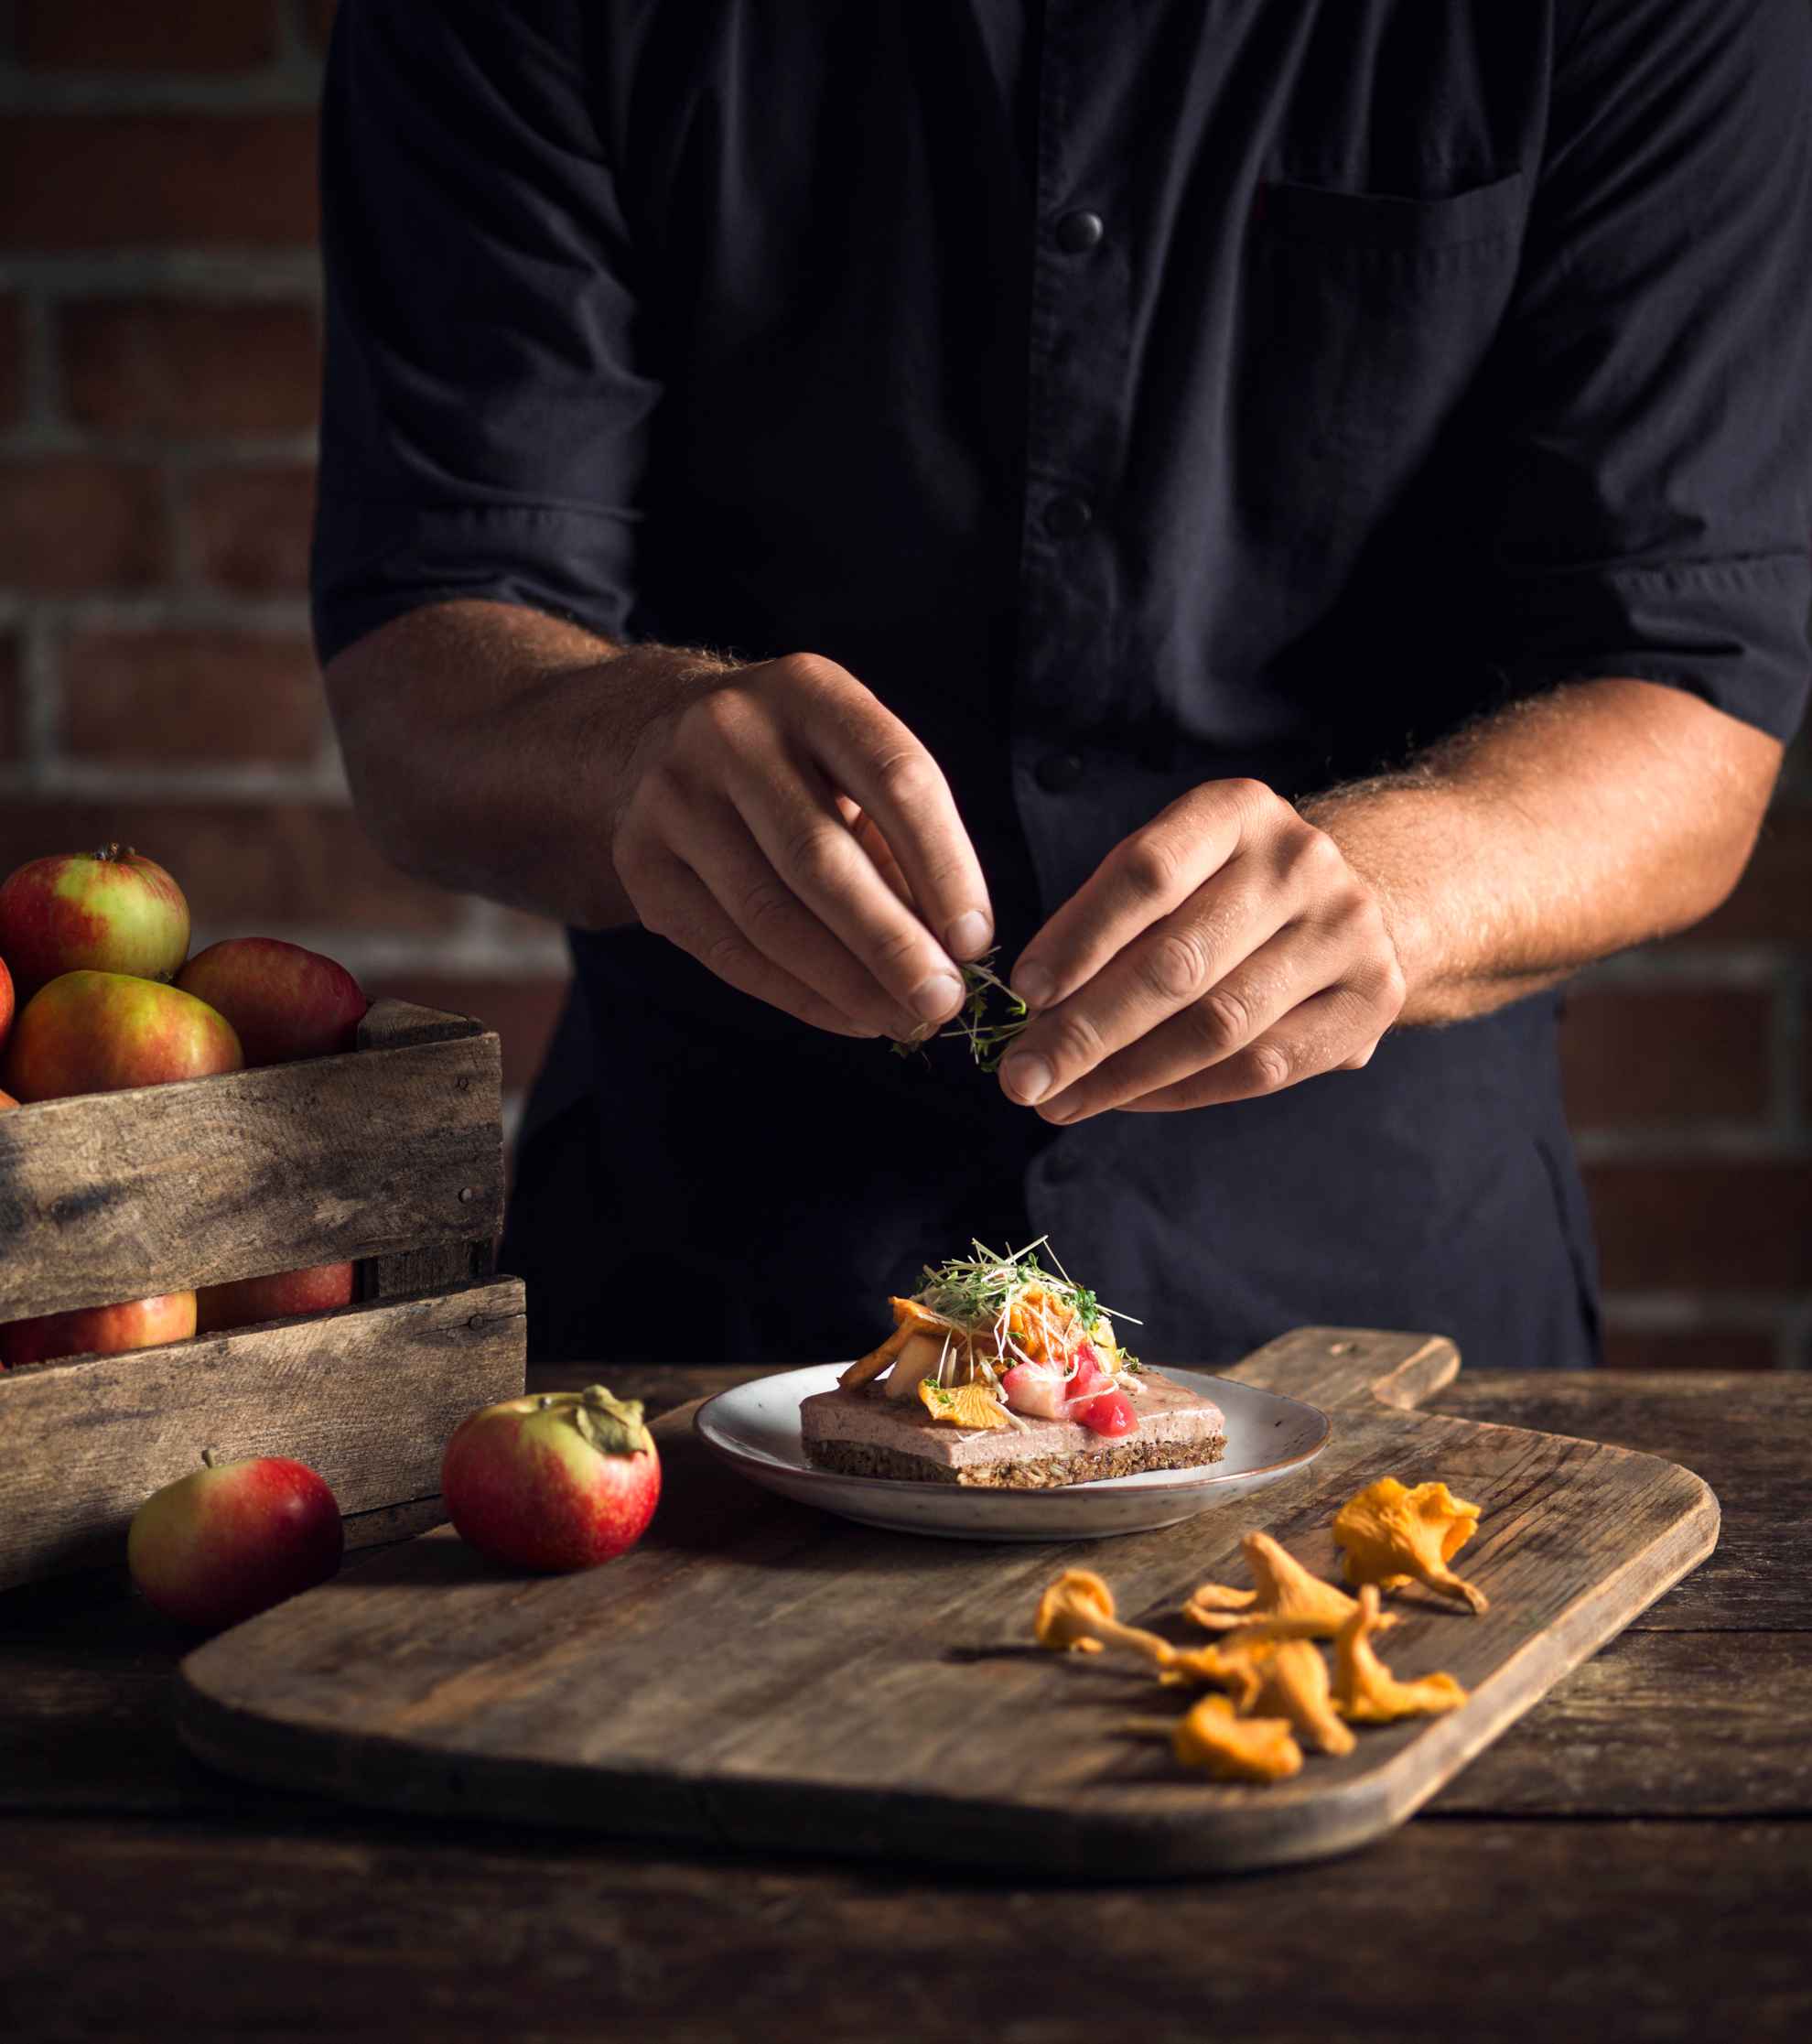 The hands of a person is in focus, they are preparing a sandwich topped with chanterelles and vegetables. Apples and chanterelles lie on the wooden table